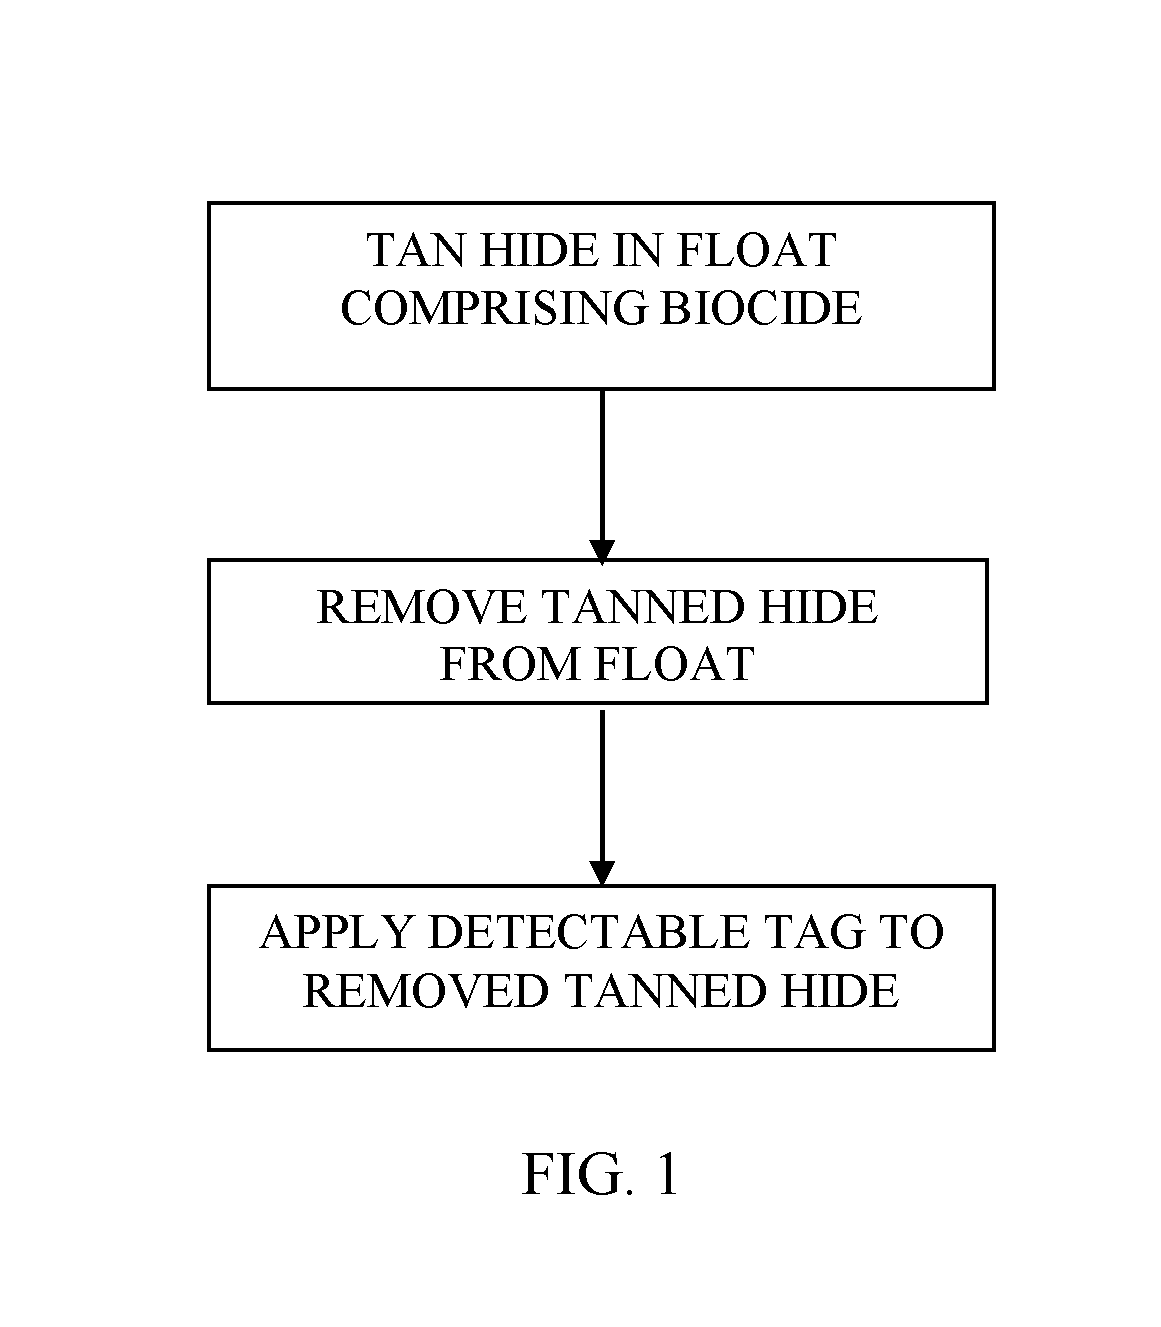 Method And System For Tagging Leather Or Hides Treated With Biocide And Identifying Same